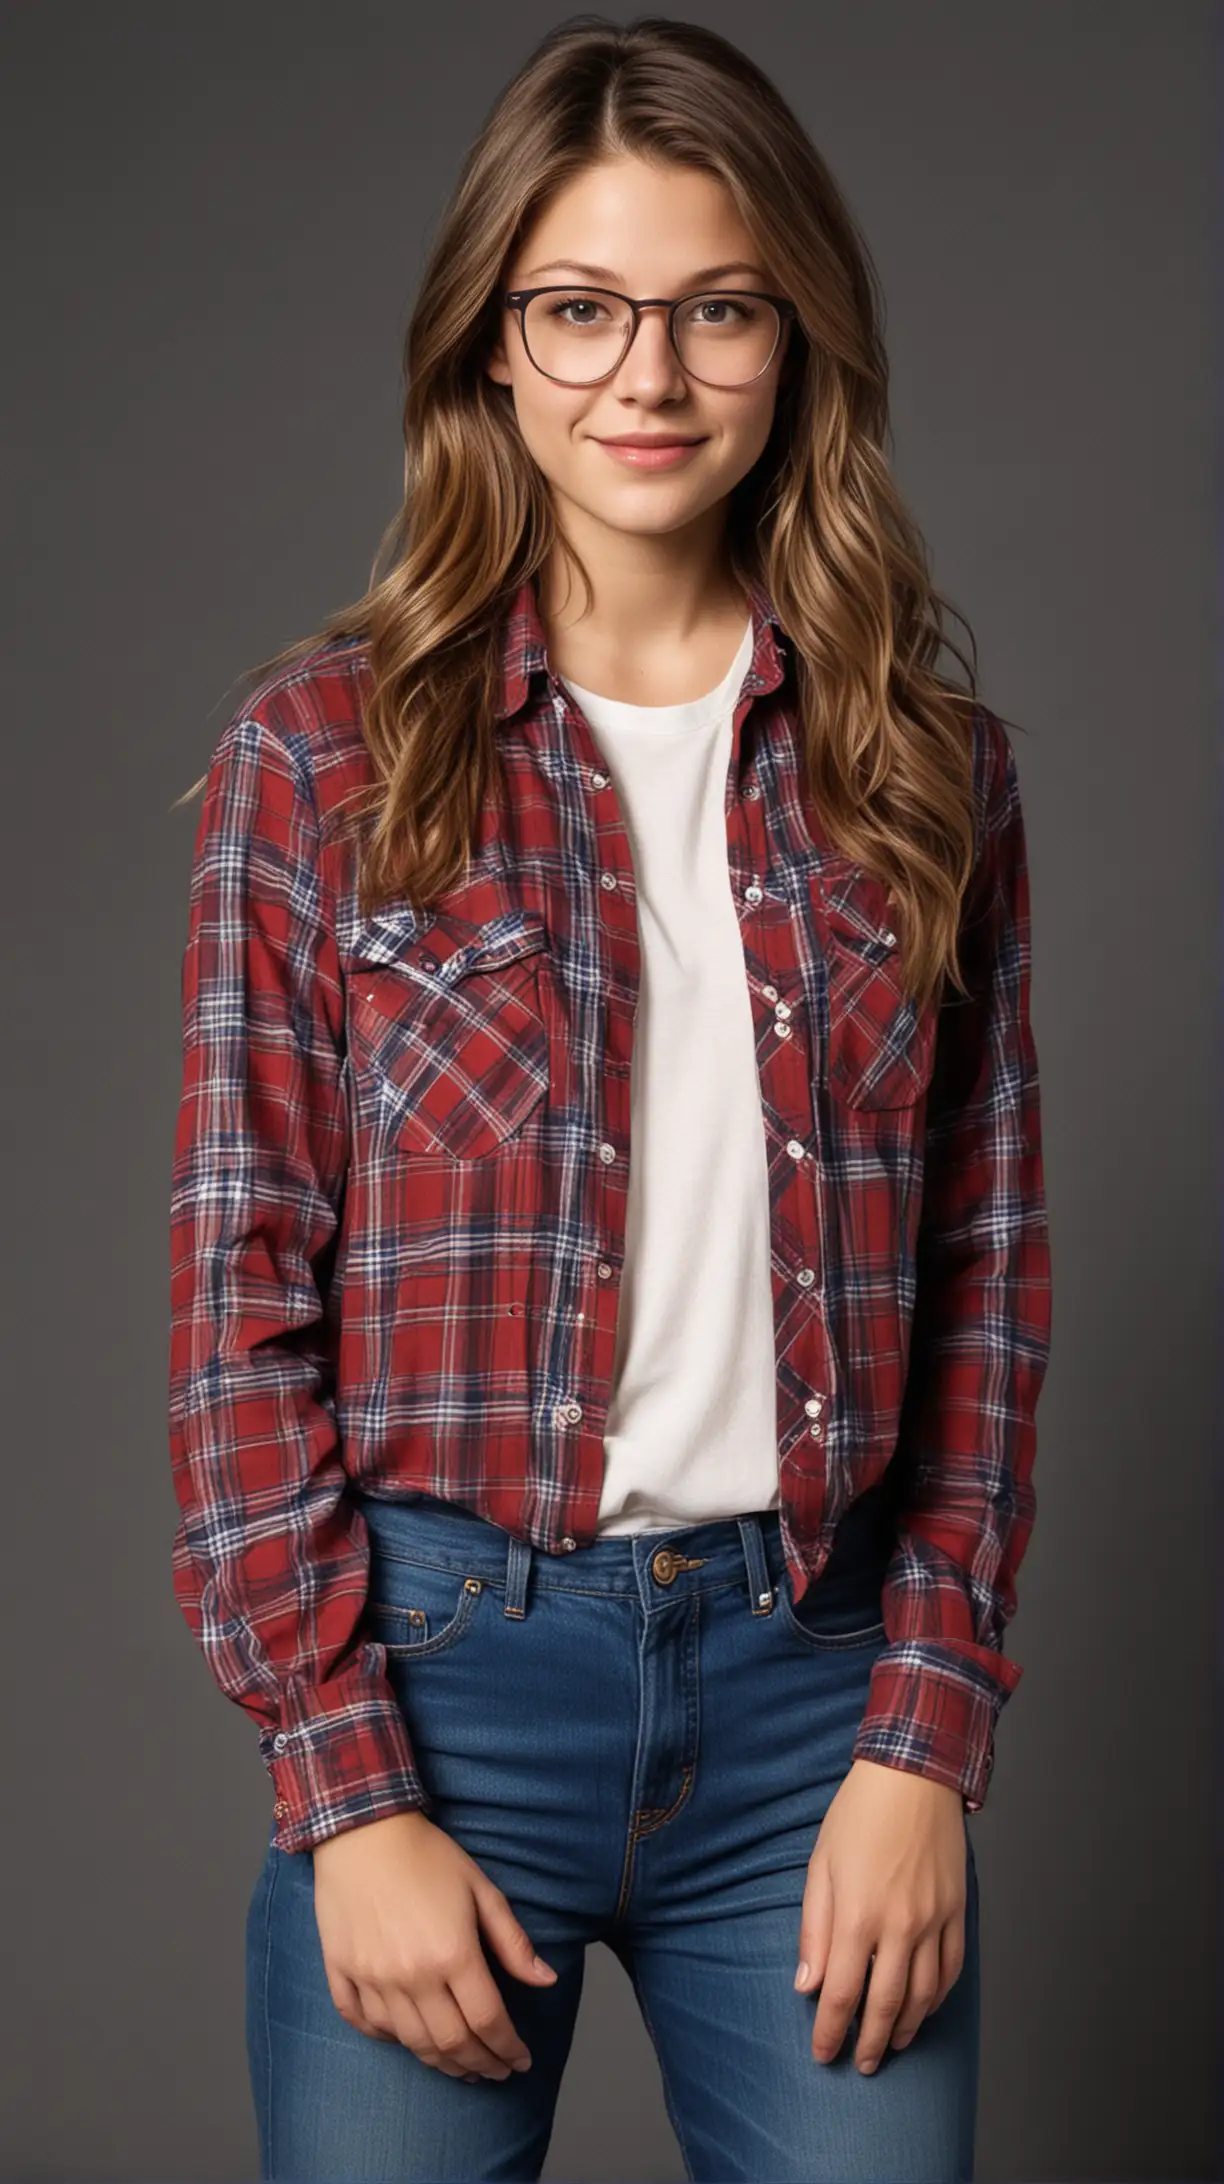 Young Woman in 1980s Style with Glasses Flannel Shirt and Jeans Melissa Benoist Inspired Artwork